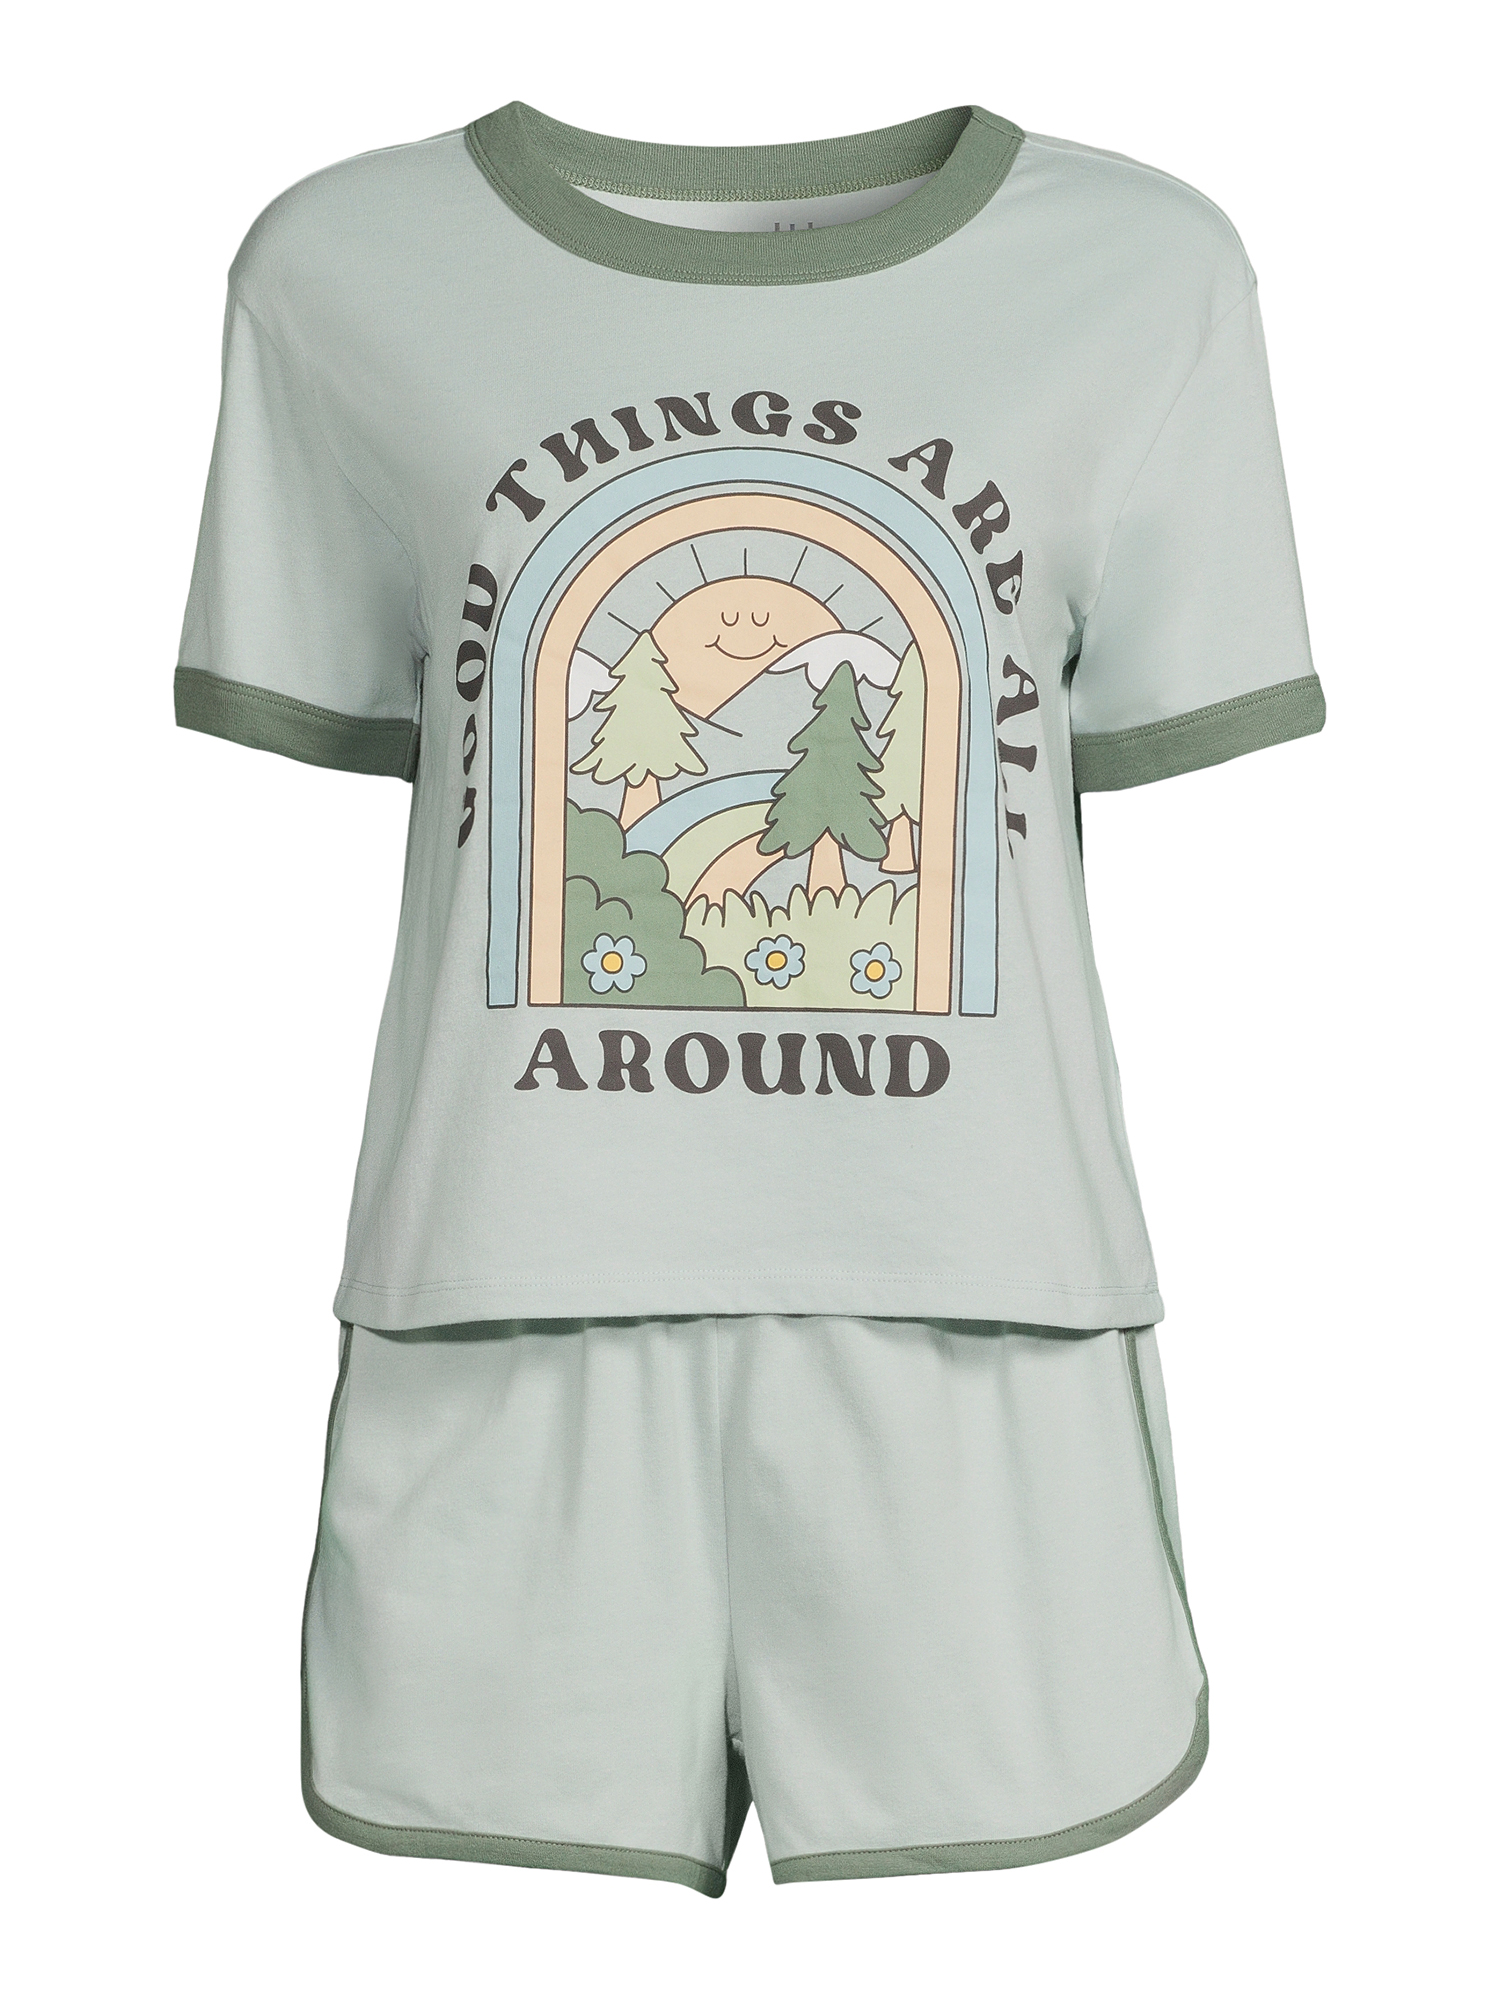 Good Things Women's Ringer Tee and Short Sleep Set, 2-Piece - image 4 of 5